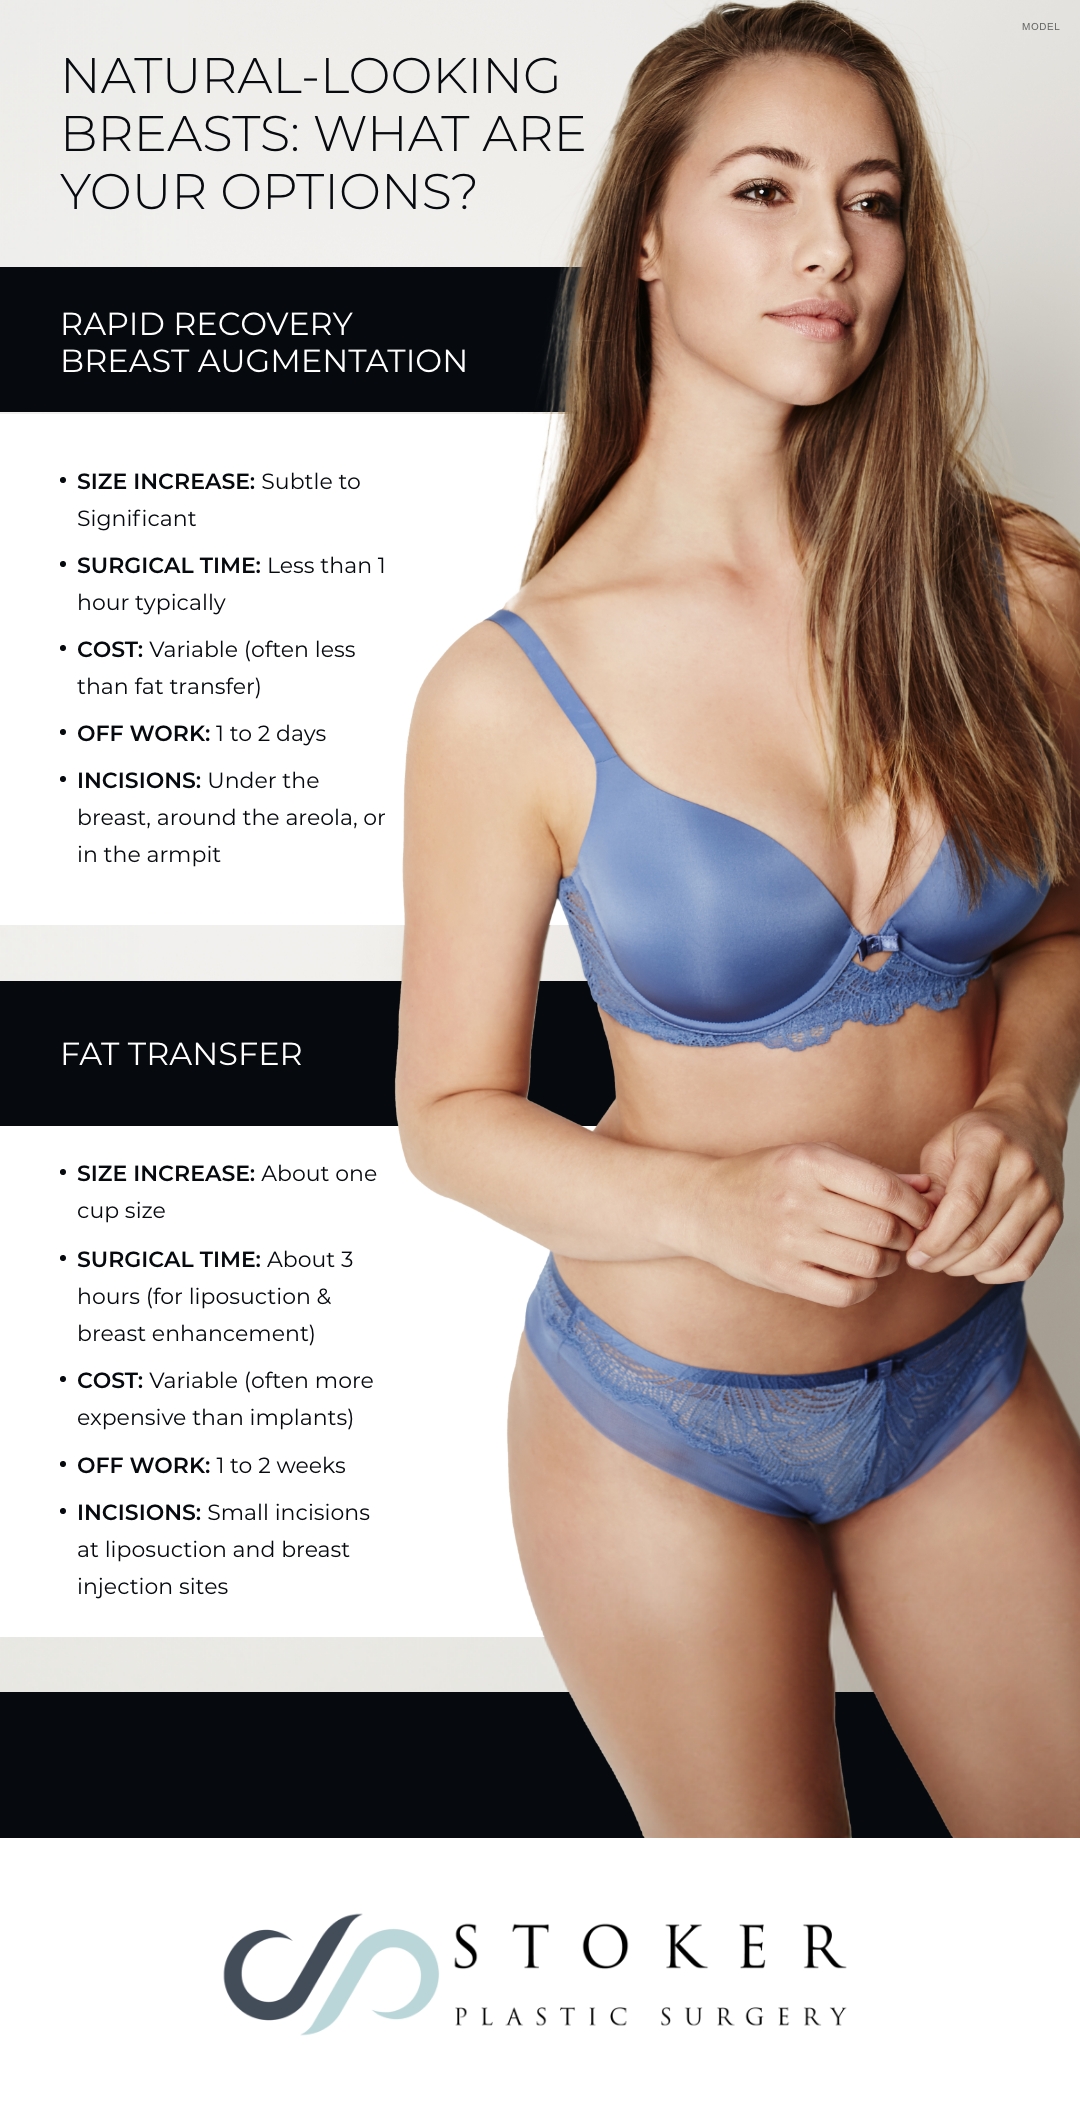 Infographic with model in blue underwear detailing options to achieve natural-looking breast augmentation